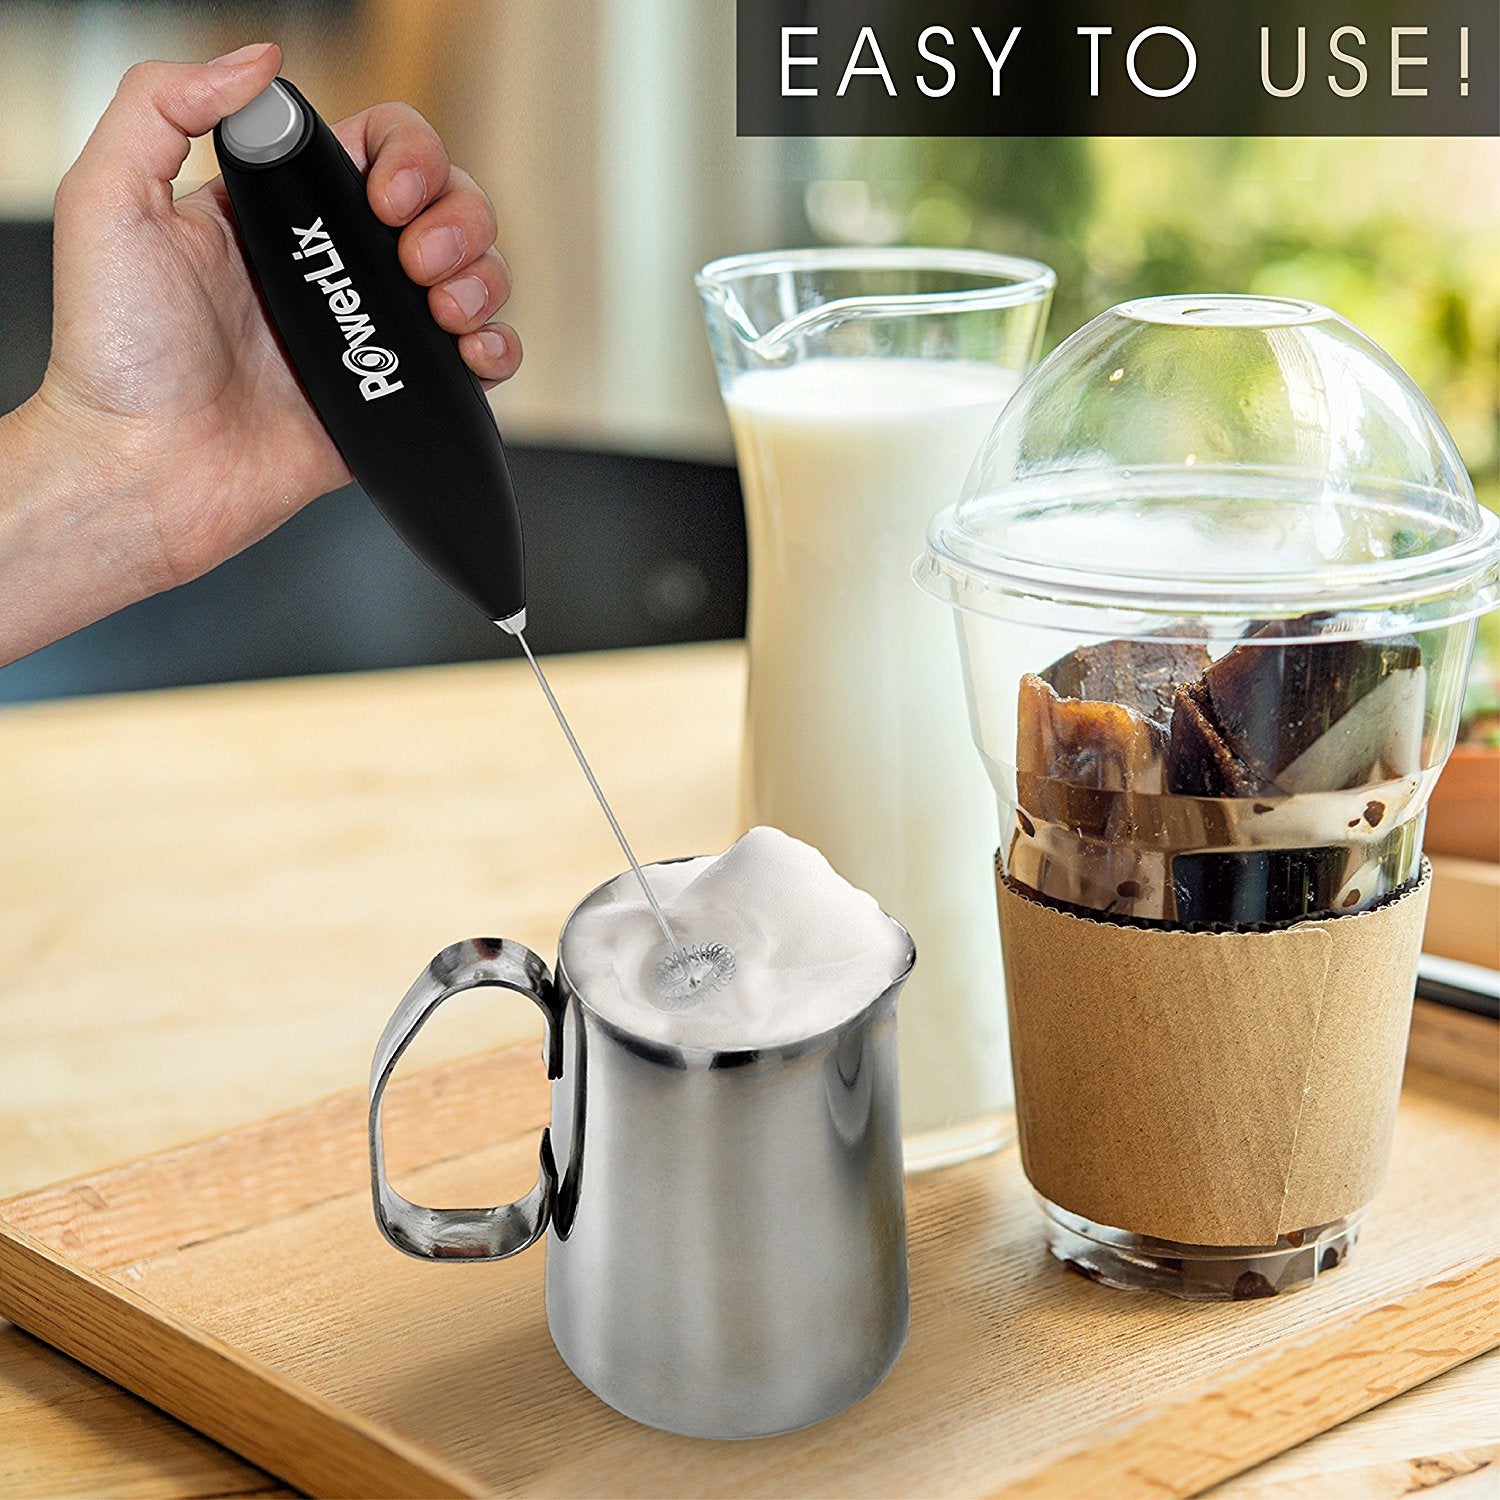 Powerlix milk frother in use to foam milk in the milk pitcher. There is a glass of milk and iced coffee cup behind it. The text above reads, "Easy to use."